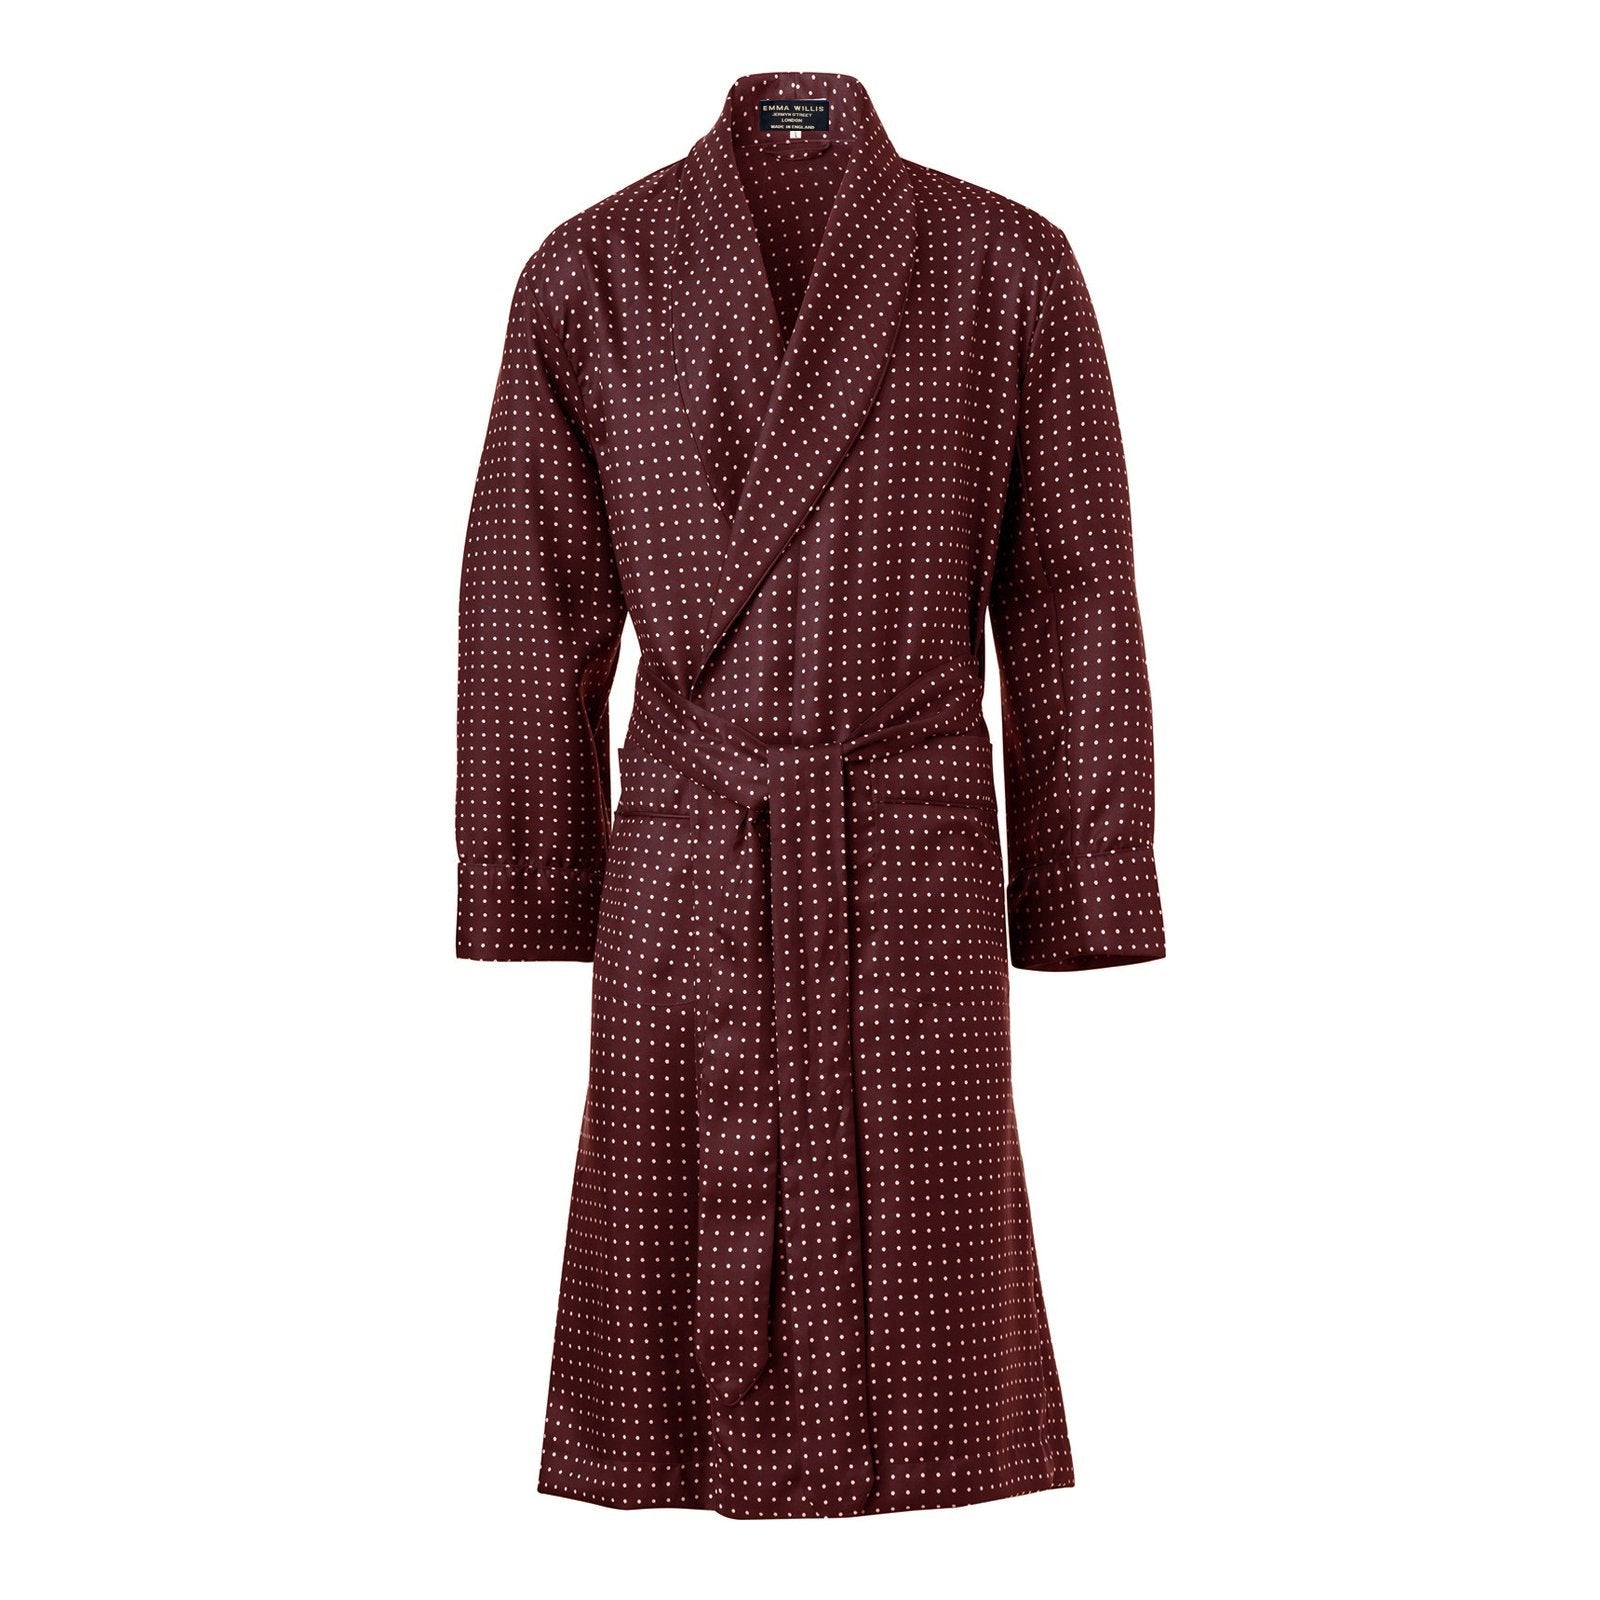 Burgundy and White Spot Silk Dressing Gown - New Collection - Emma Willis